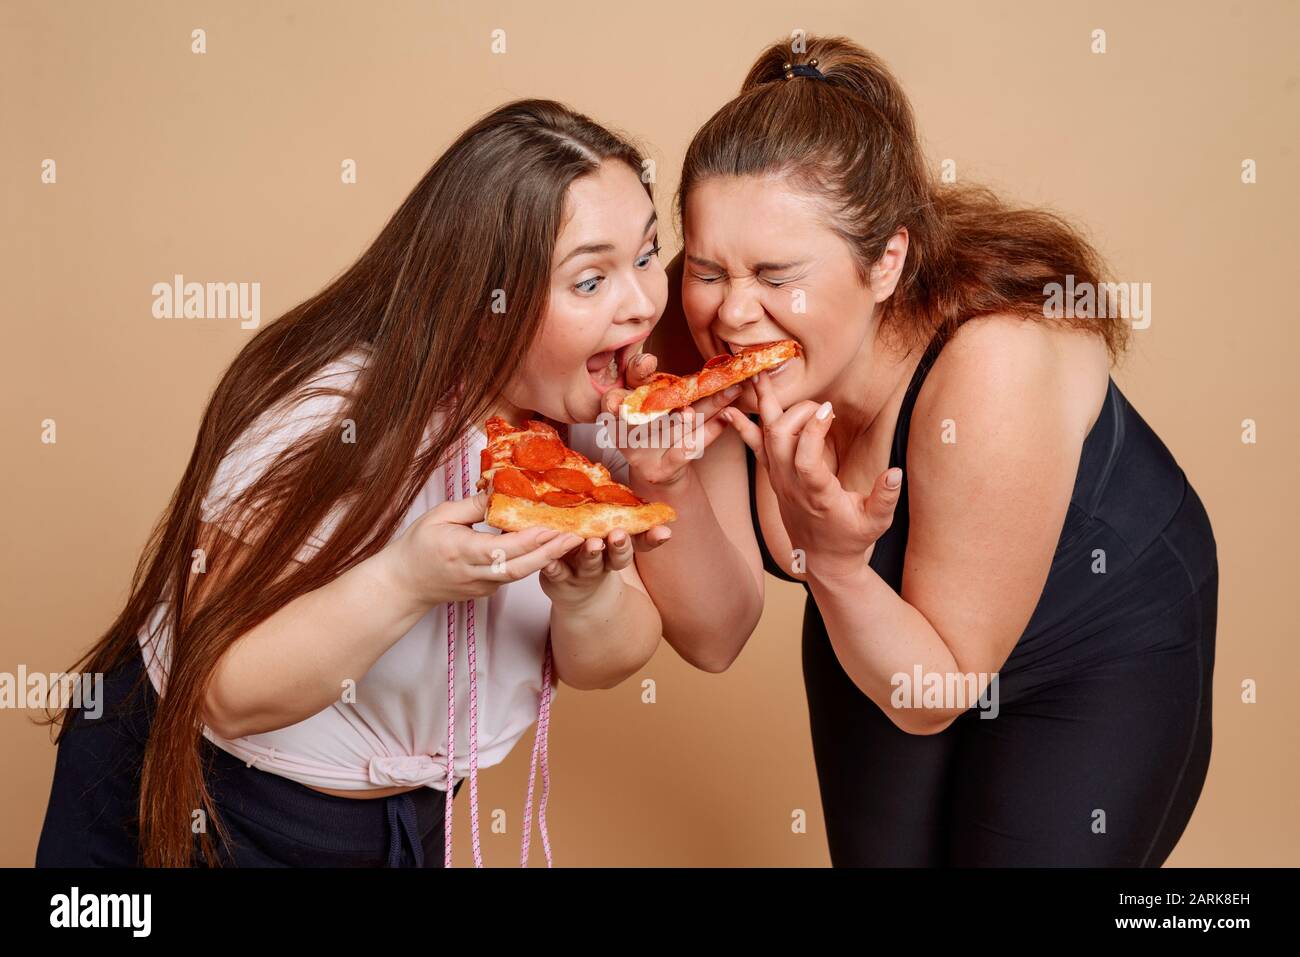 Two girls eating pizza greedily after gym classes Stock Photo